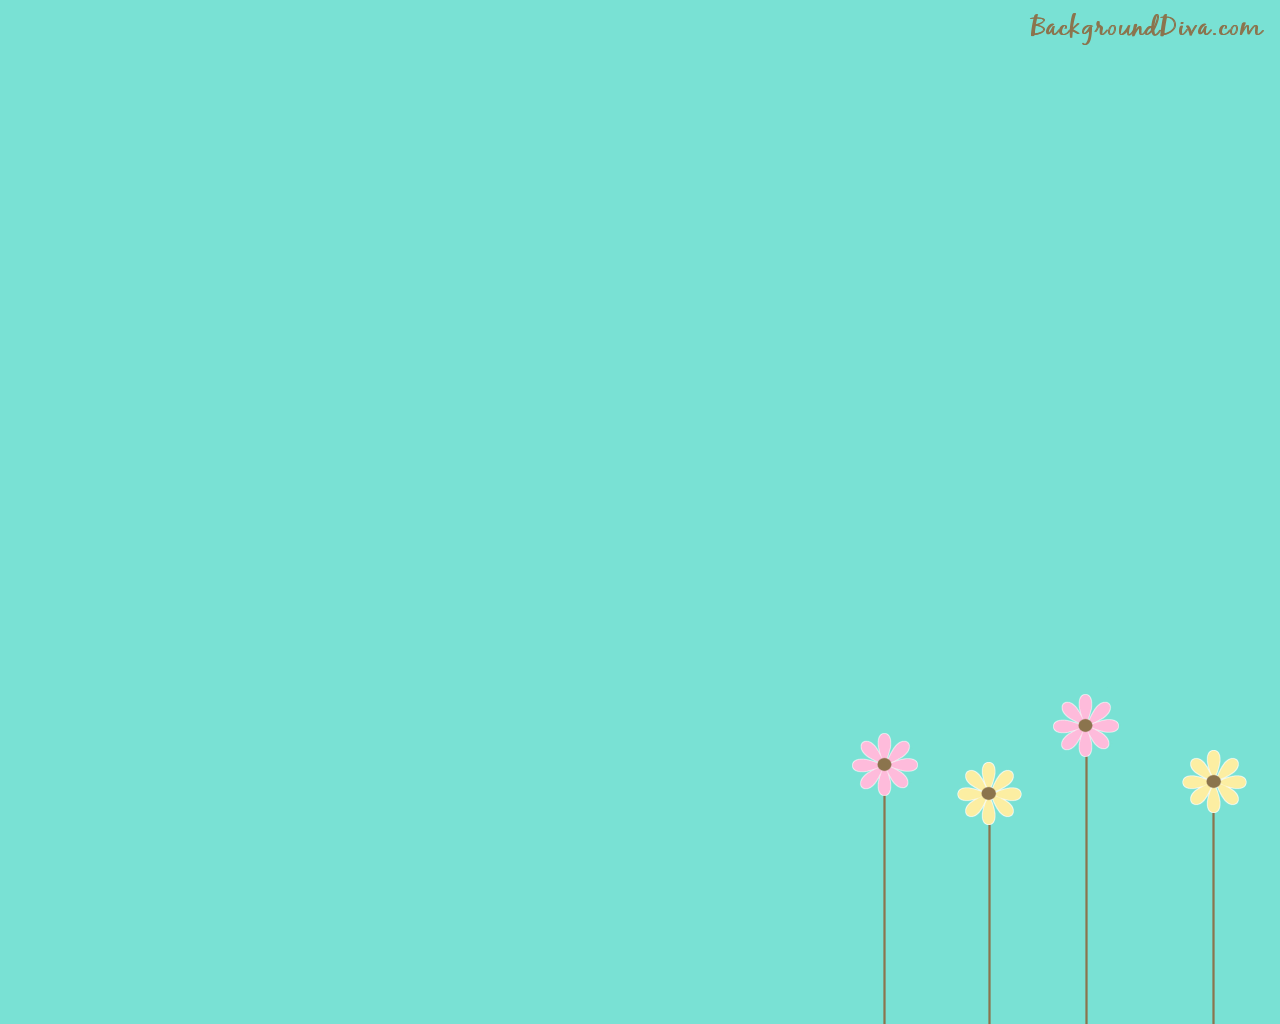 Simple and cute simple cute backgrounds for computers For your desktop